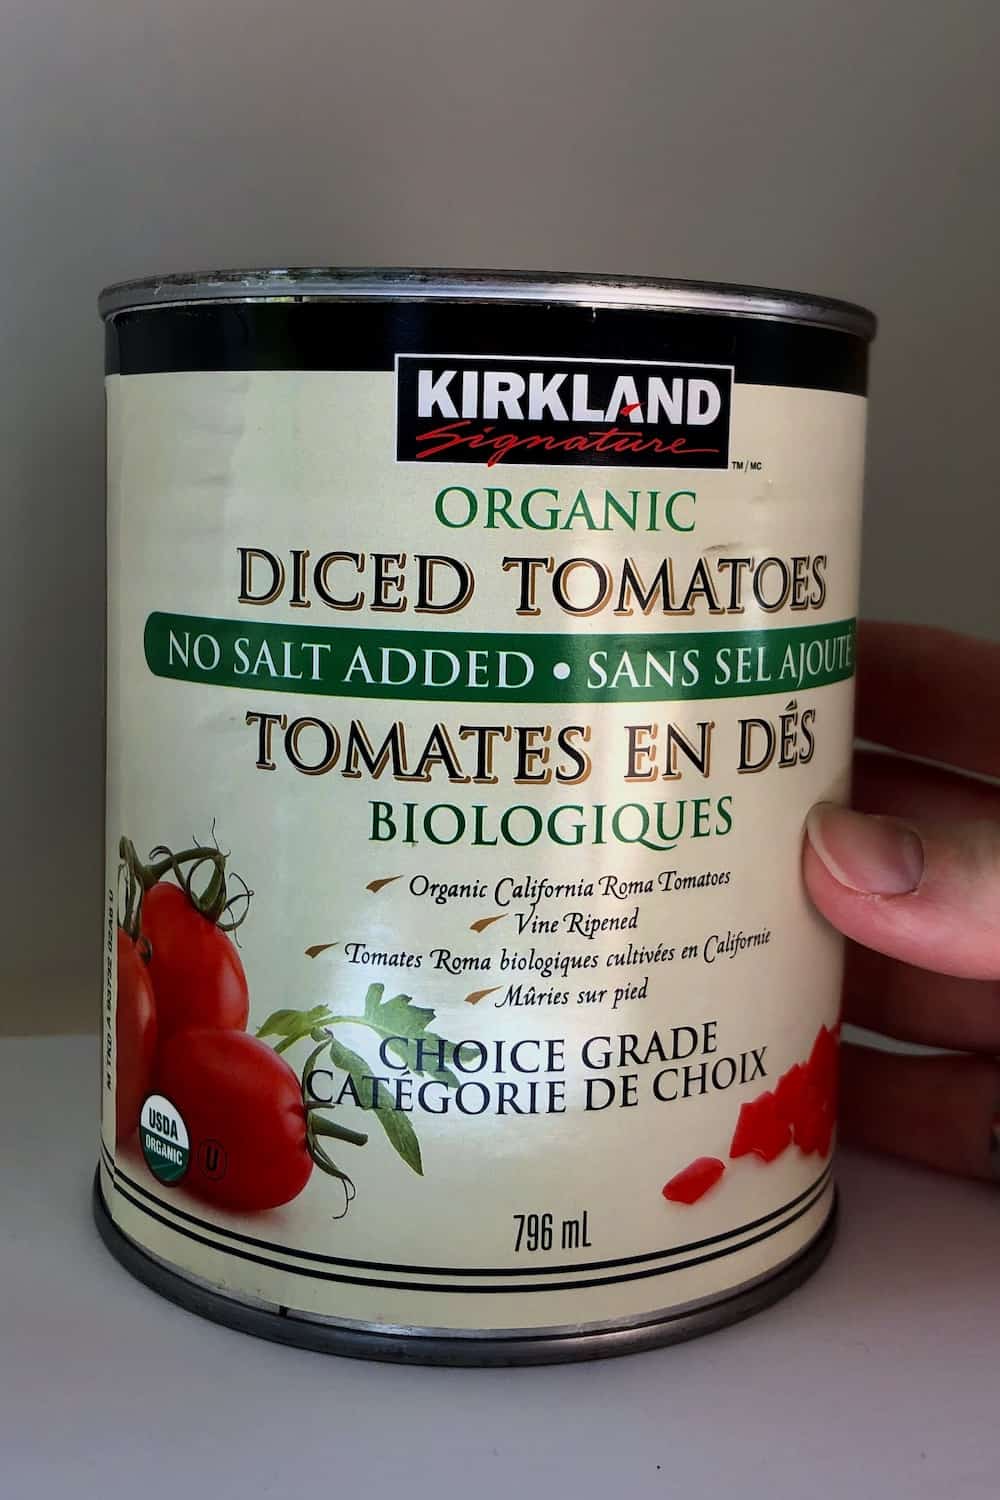 Canned plum tomatoes from costco - can of diced roma tomatoes